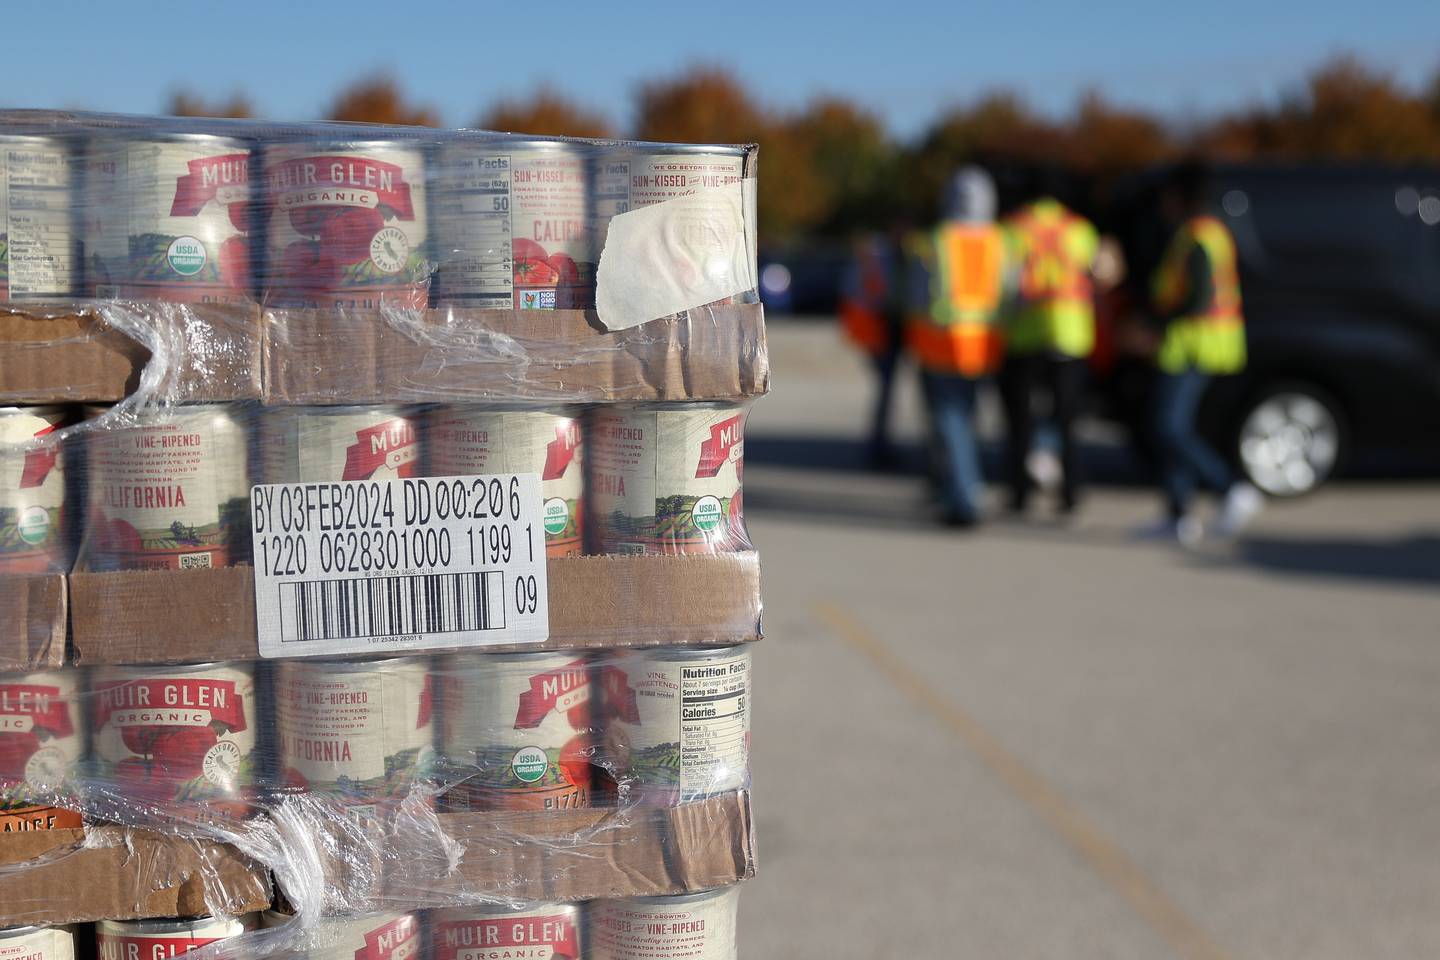 Canned goods sit stacked in the parking lot at Joliet Junior College as volunteers load a car with groceries on Saturday, Oct. 21. With inflation and rising food costs, Northern Illinois Food Bank held a Free PopUp Grocery Distribution giving away groceries to 700 families.